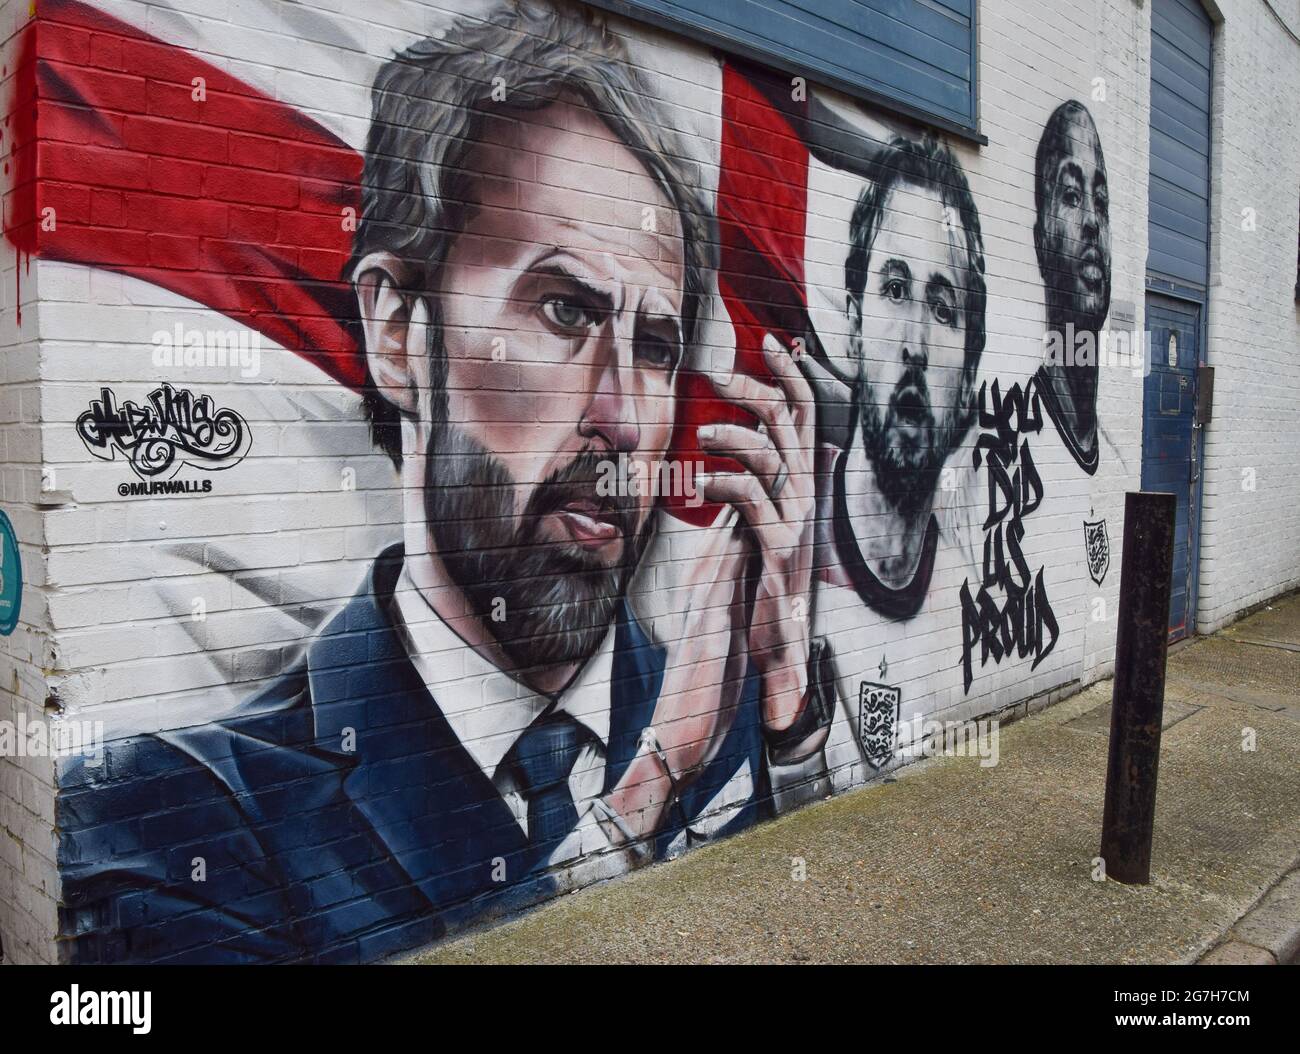 London, United Kingdom. 14th July 2021. A new mural by MurWalls has been unveiled at Vinegar Yard, next to London Bridge, of England football manager Gareth Southgate and players Harry Kane and Raheem Sterling, following the team's achievement of making it to the final of Euro 2020.  (Credit: Vuk Valcic / Alamy Live News) Stock Photo